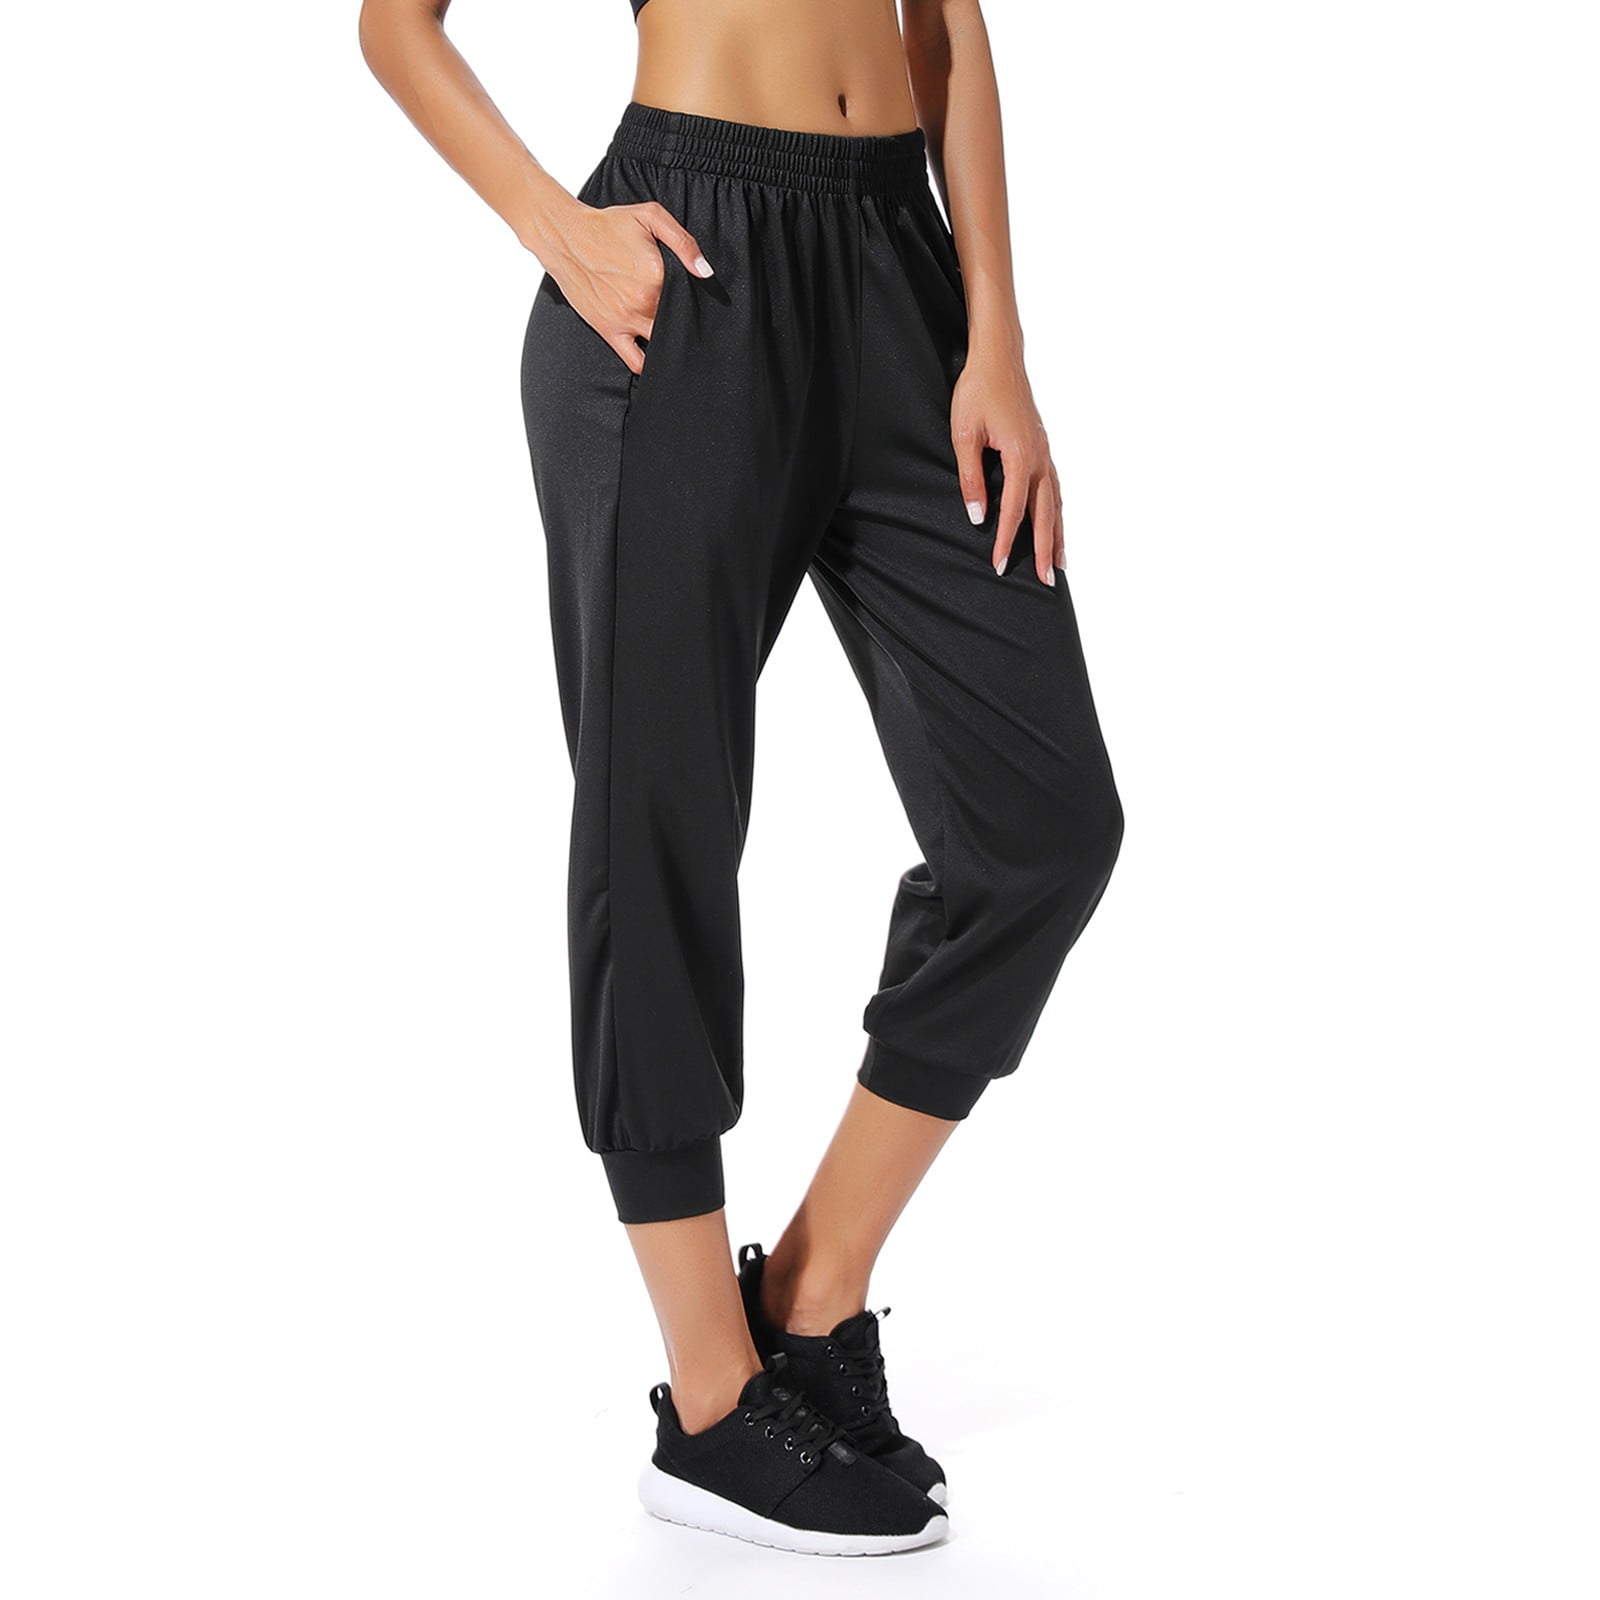 CROSS1946 Womens Relax Fit Jogger Sweatpants With Pockets Drawstring ...